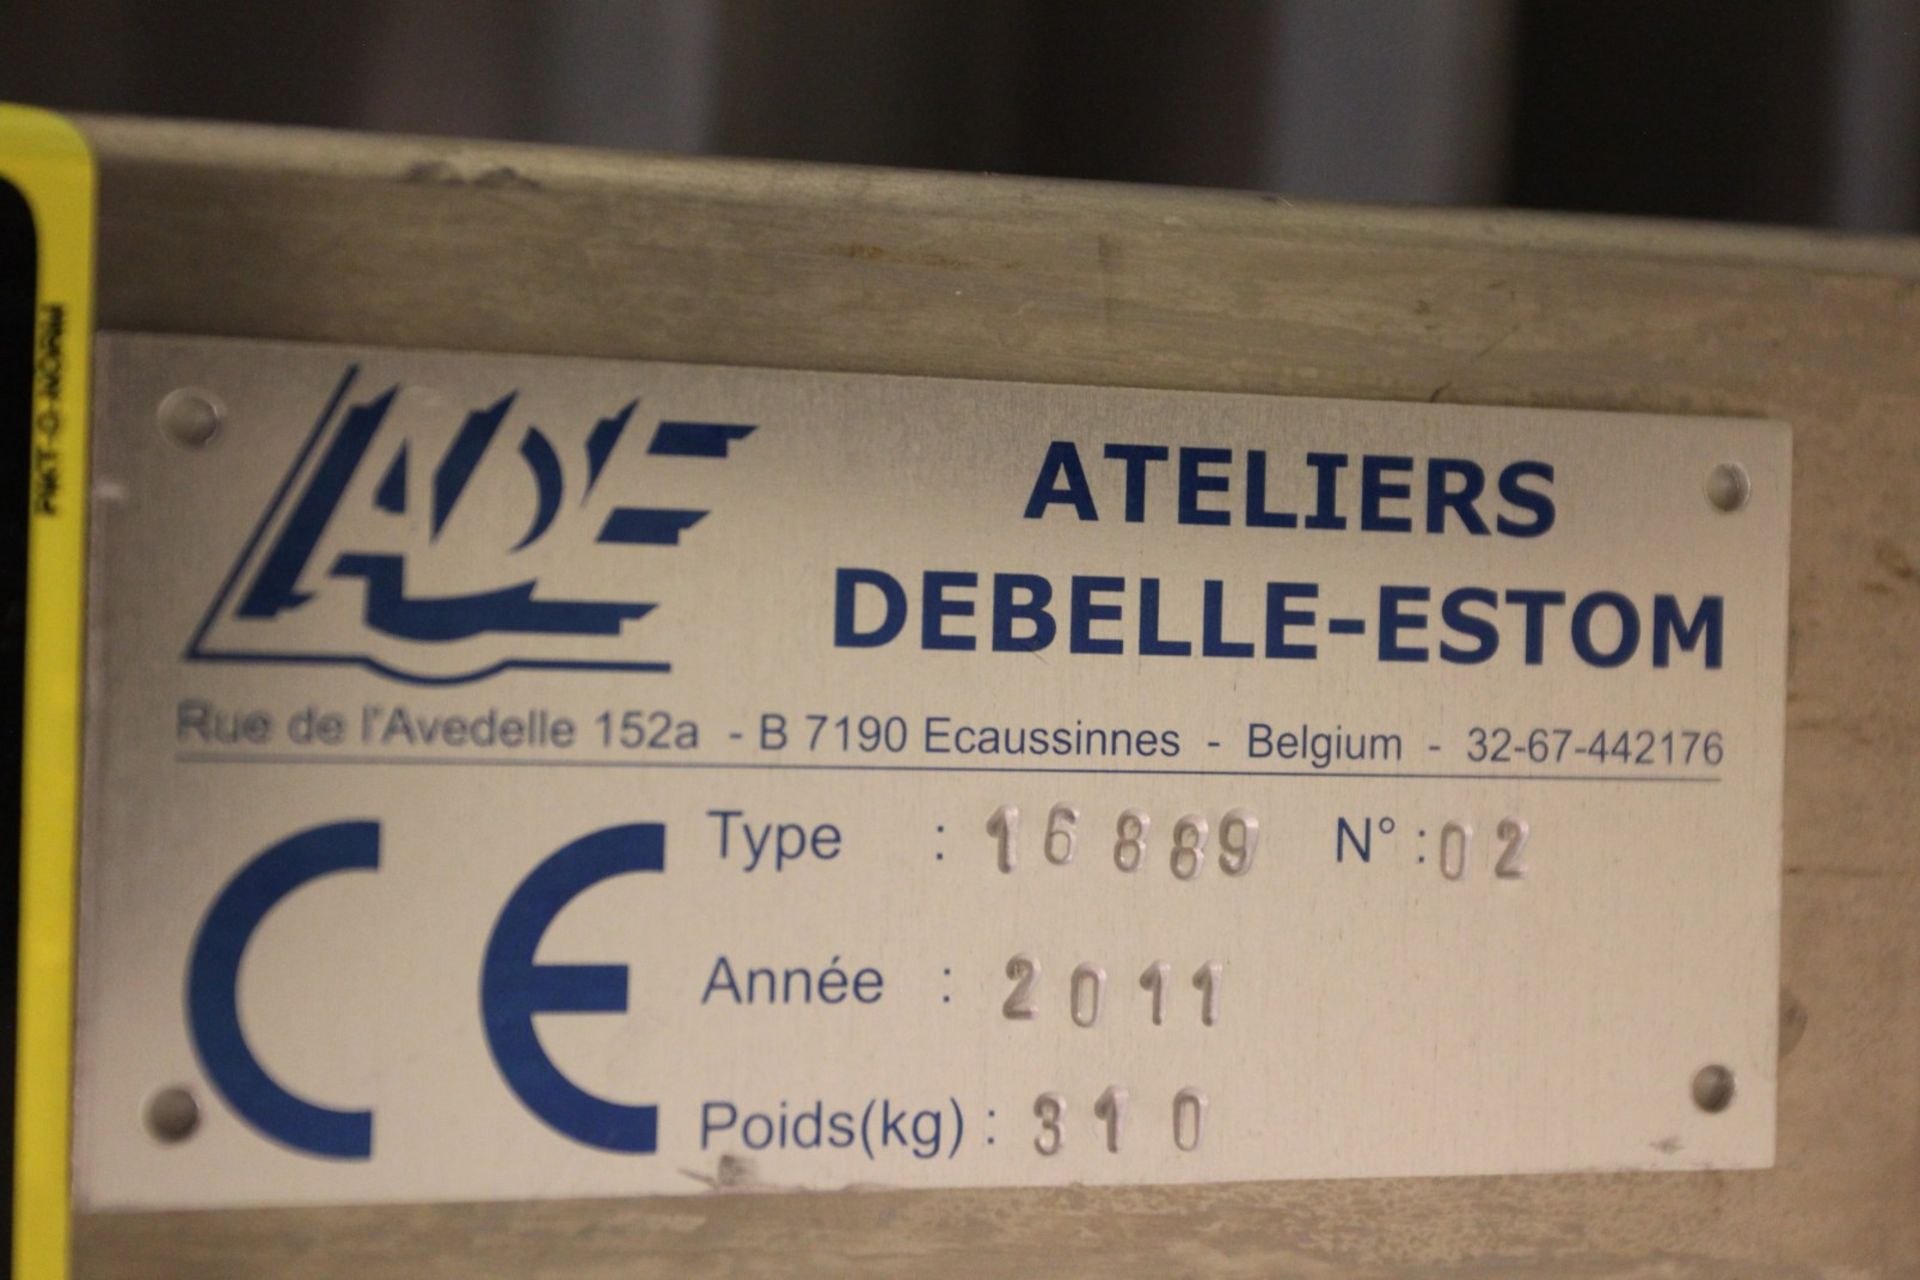 2011 ADE Ateliers Debelle-Estom 16889 Mobile Electric Lift Table, s/n 02 - Image 4 of 4